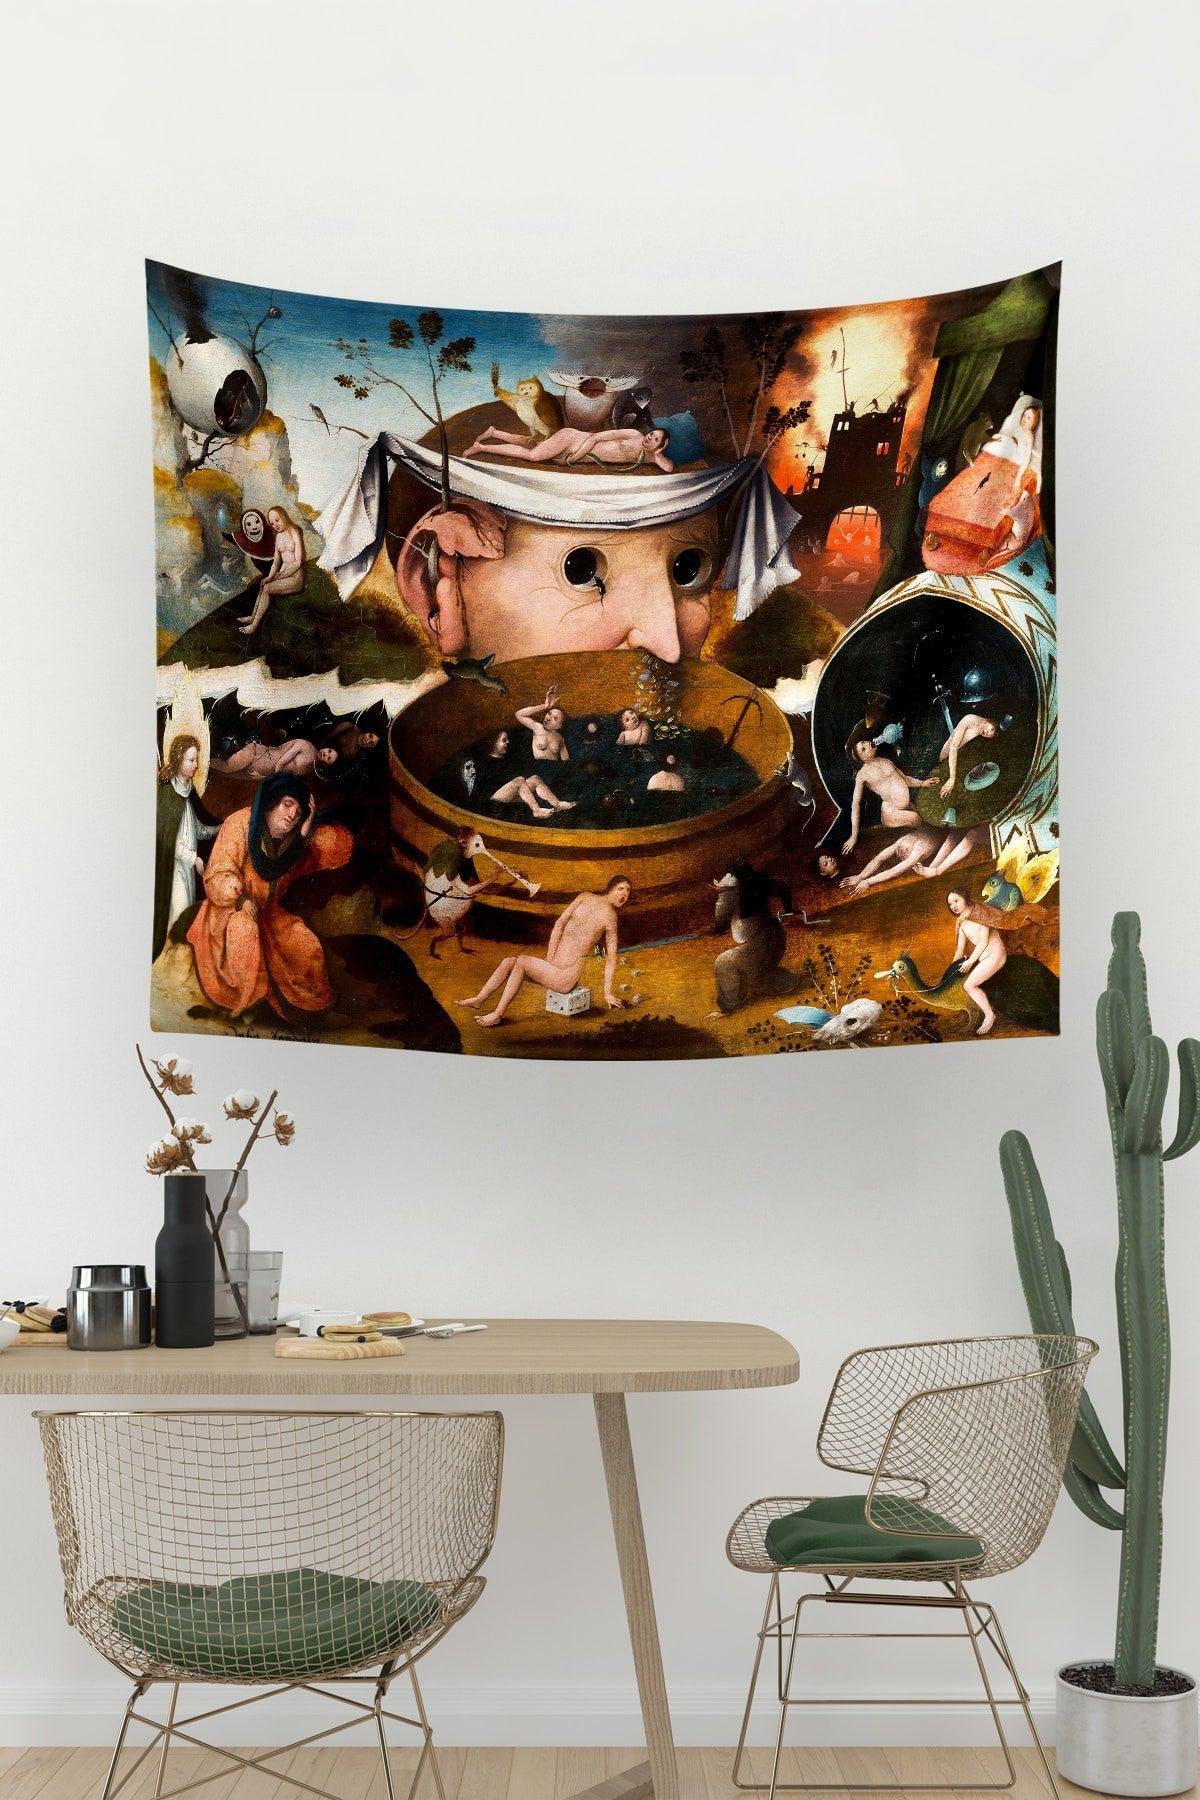 Hieronymus Bosch A Tondal Vision Wall Covering Carpet 70x90 Cm - Swordslife